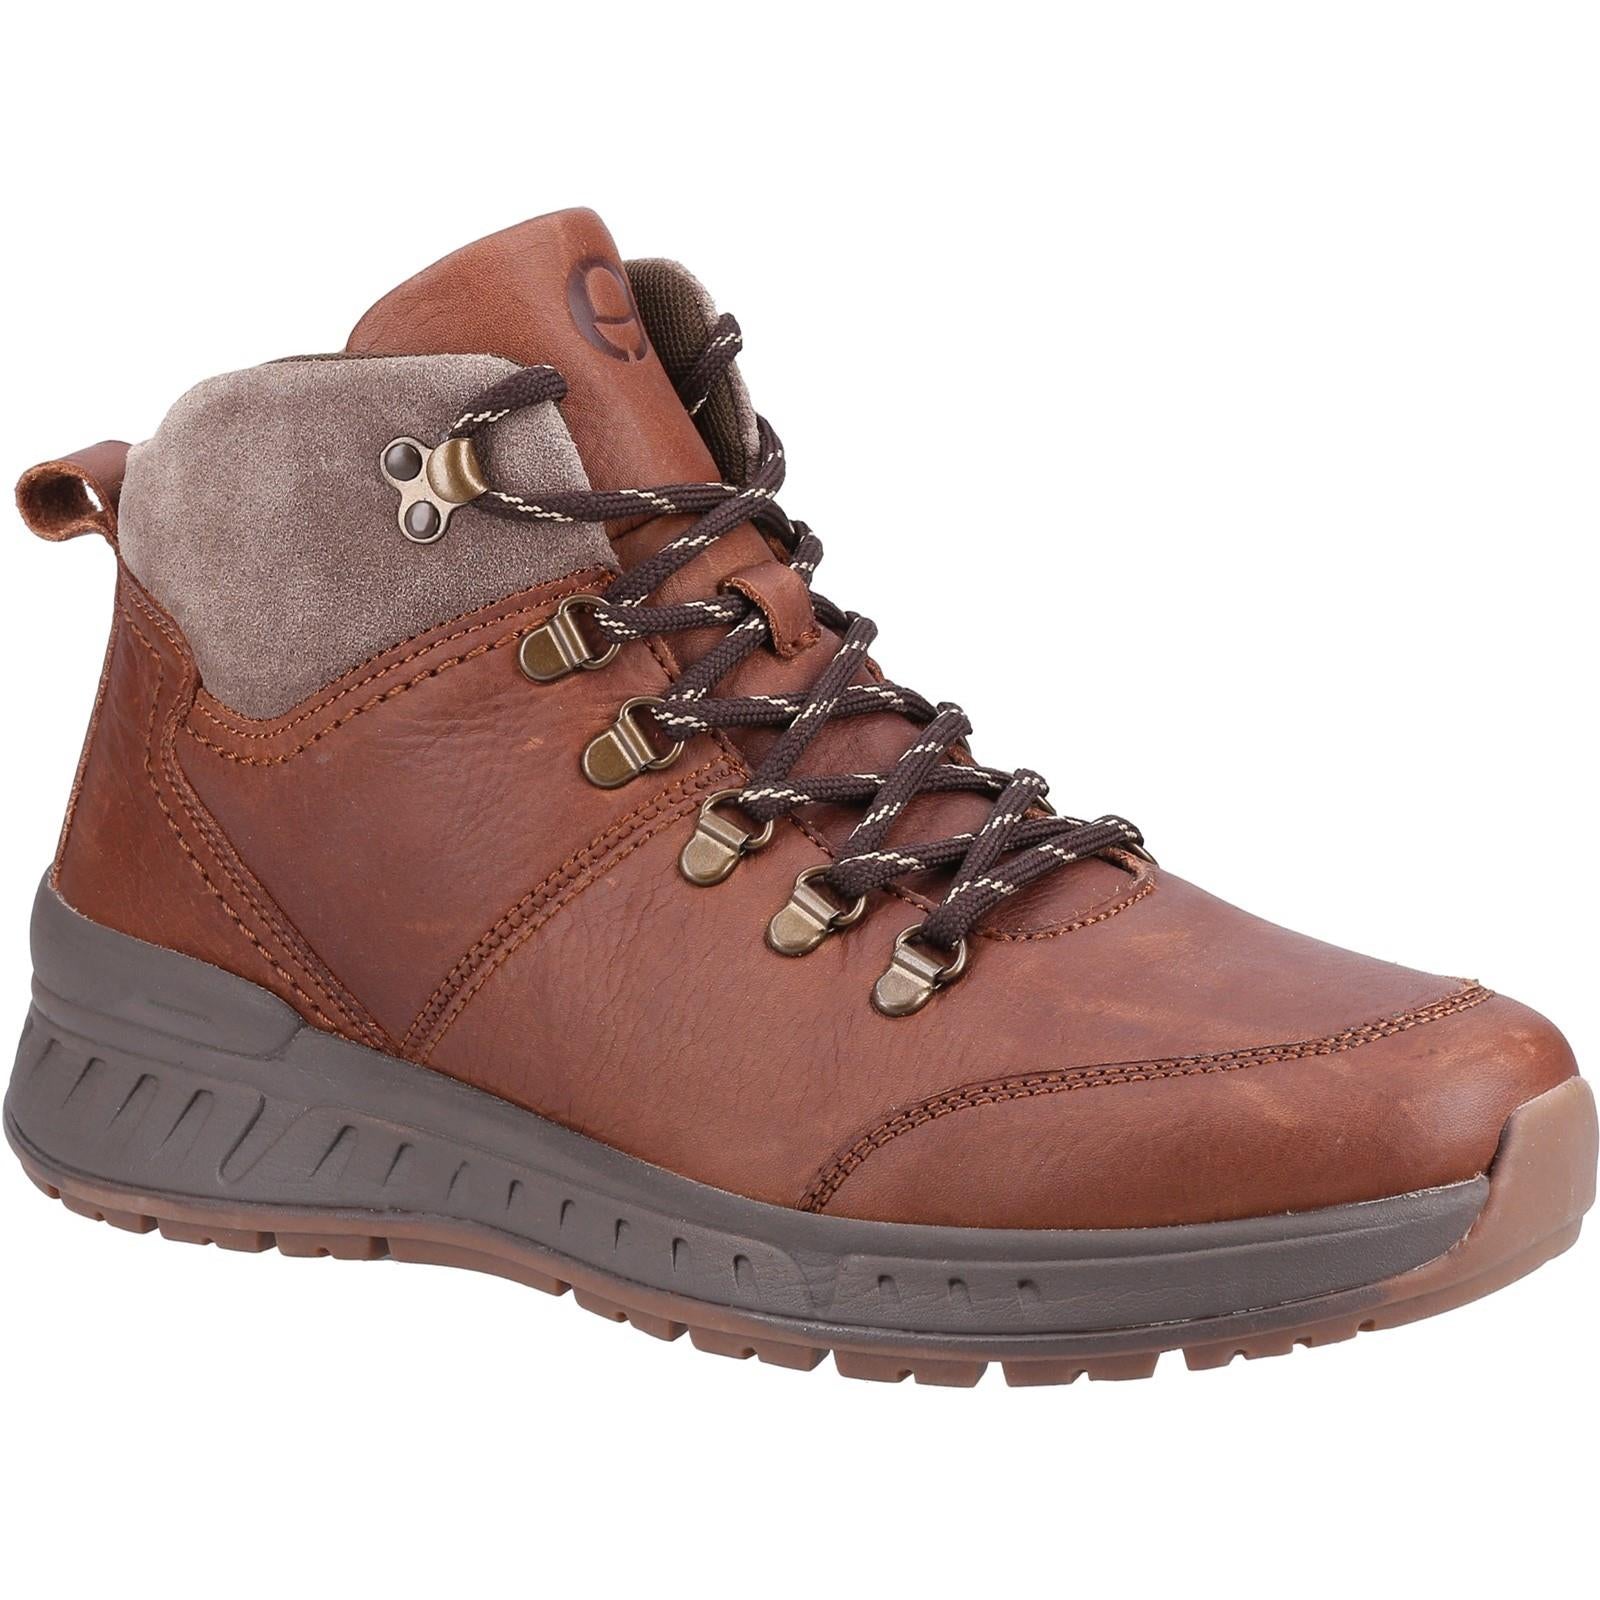 Cotswold Avening dark tan leather waterproof lace up walking hiking boots